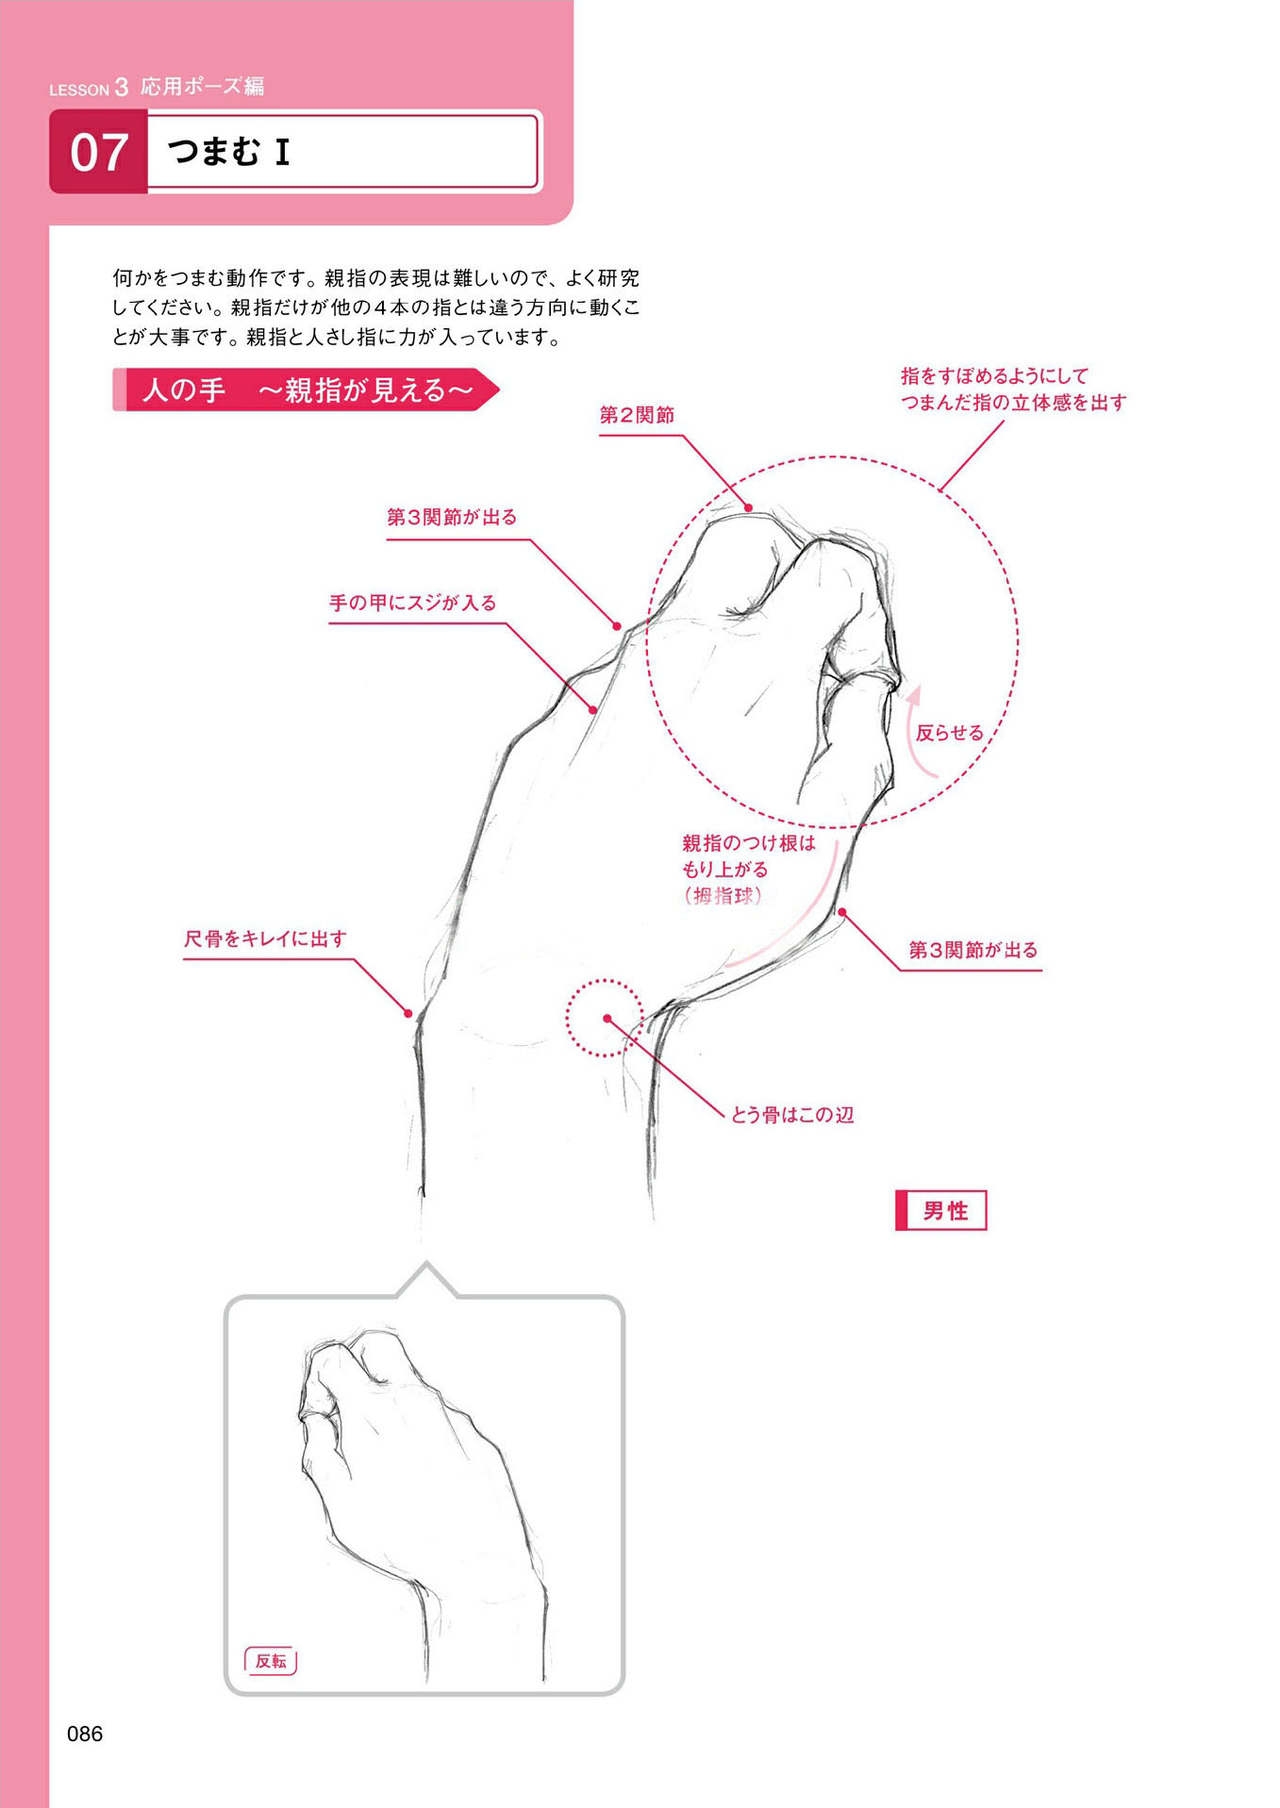 How to draw hands 86